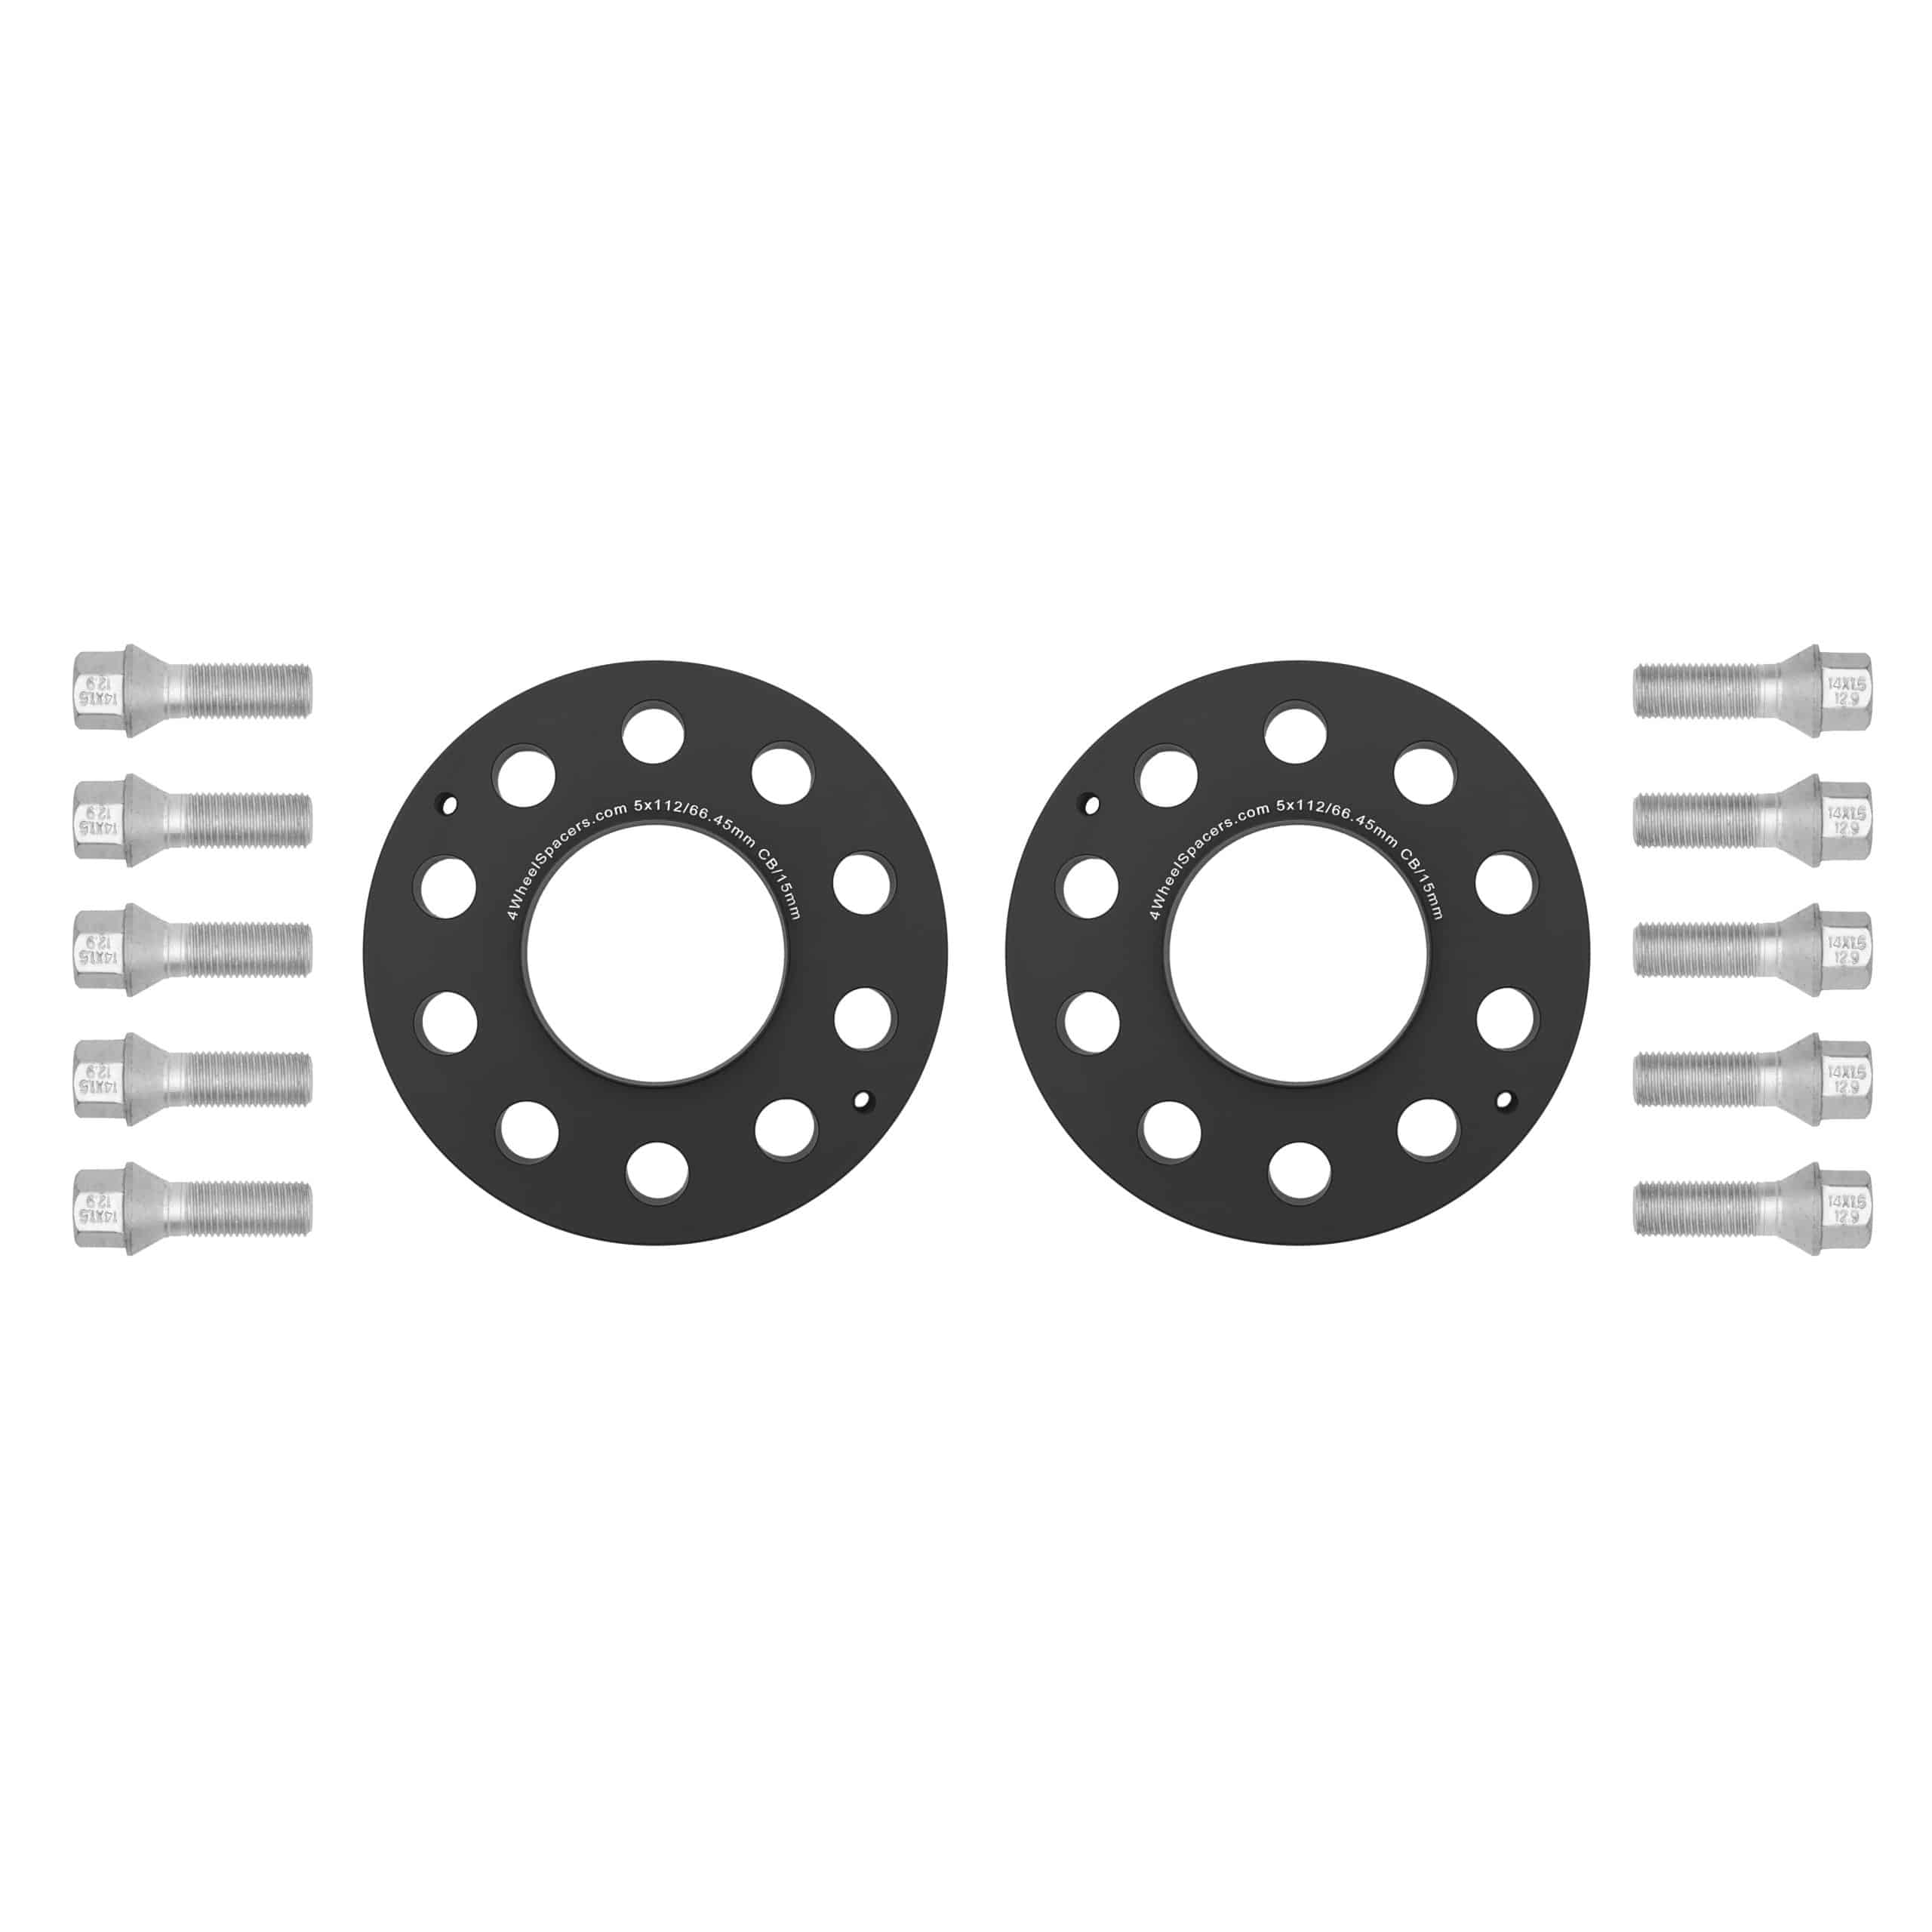 Mercedes-Benz 15mm Hub-Centric Wheel Spacers With Ball Seat Bolt Kit